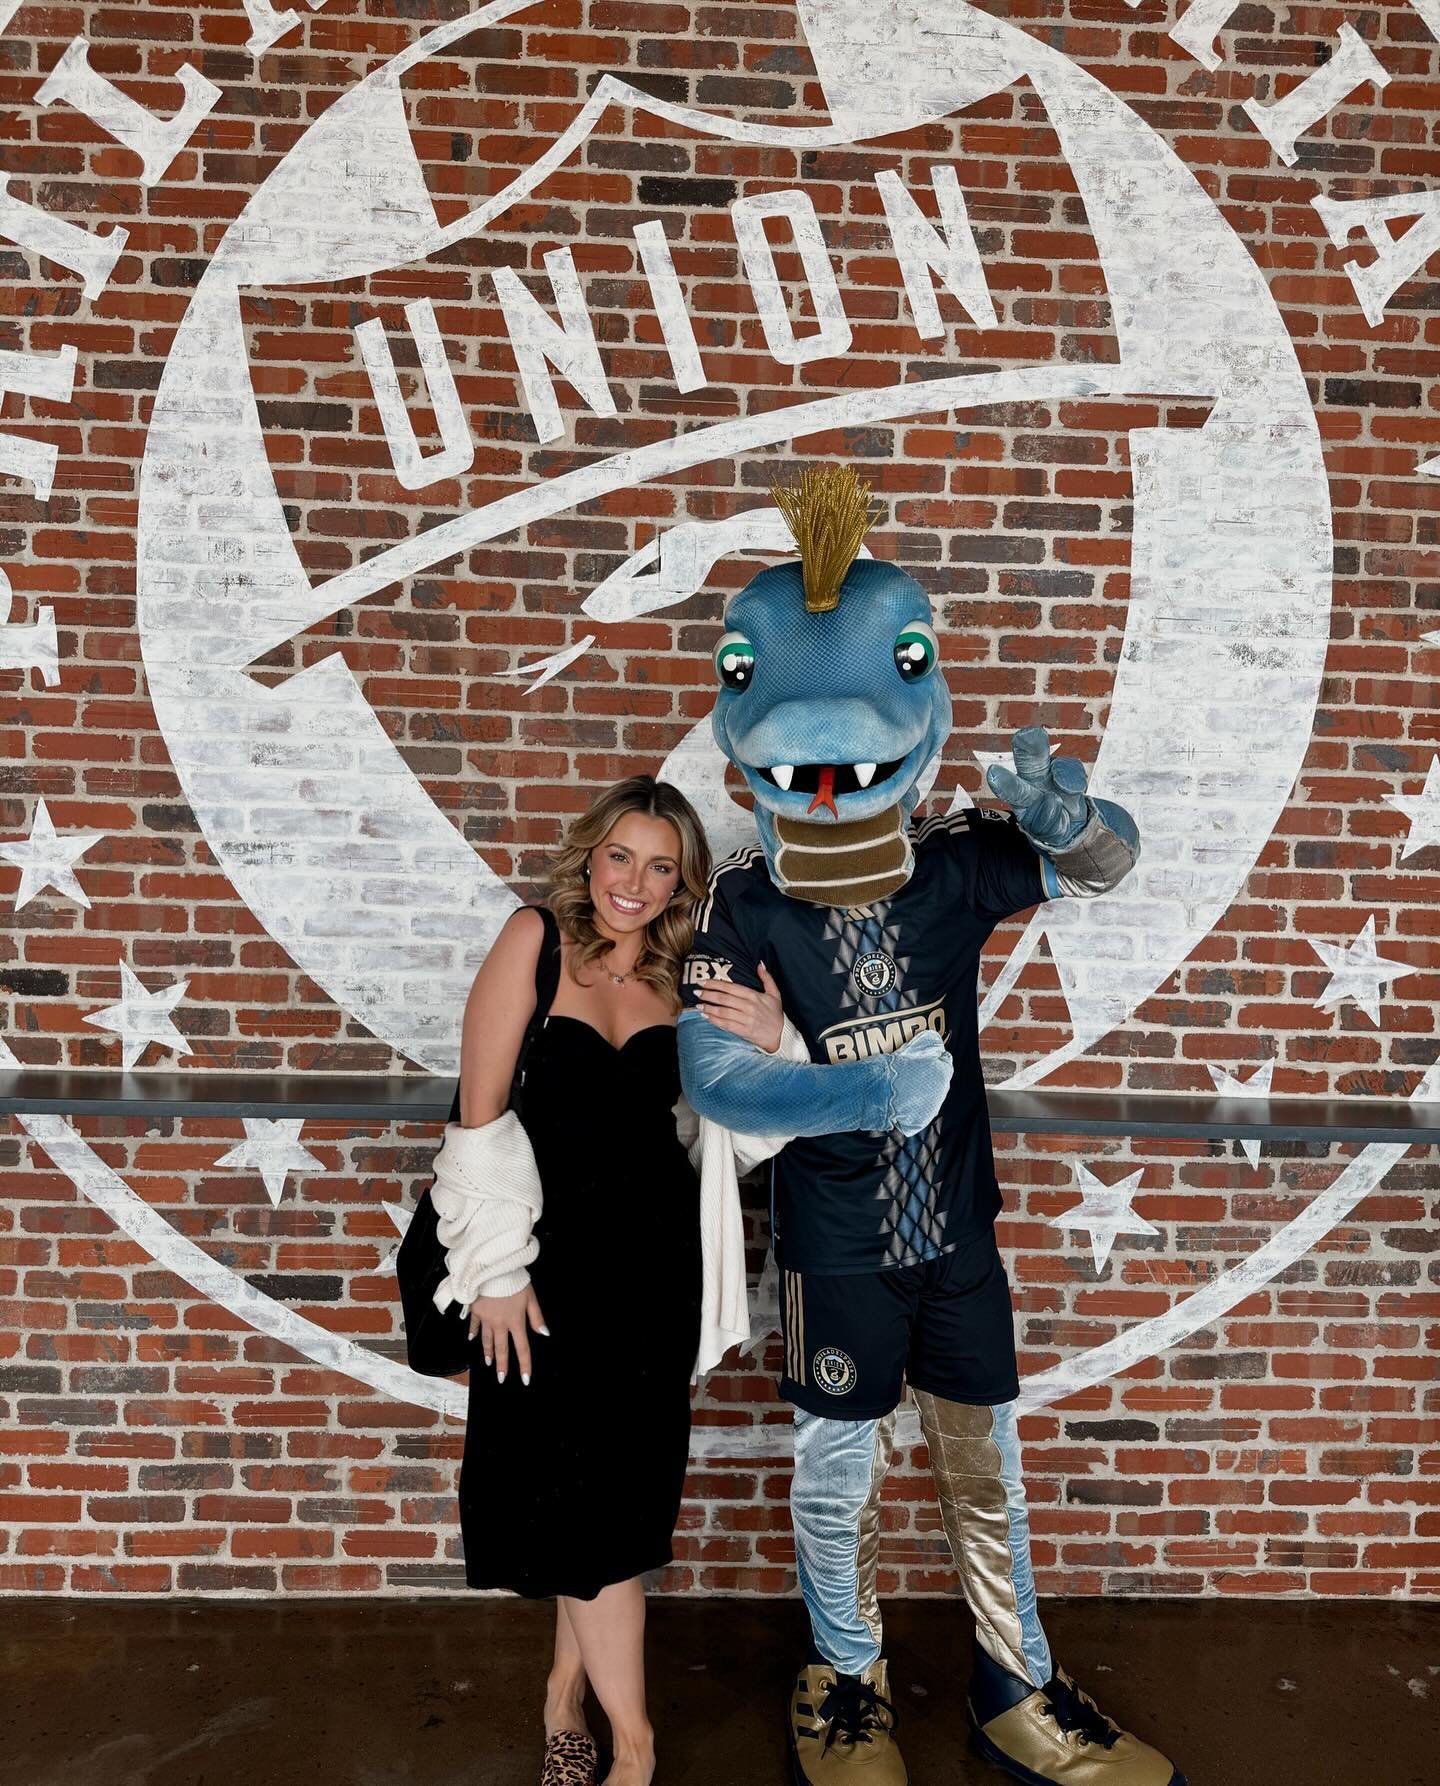 New phriends, new favorite sport, new favorite hangout spot! congrats @philaunion on the opening of #UnionYards 🐍⚽️🍻

#DOOP #PhilaUnion #PhillyProud #UnionFamily #PhiladelphiaSports